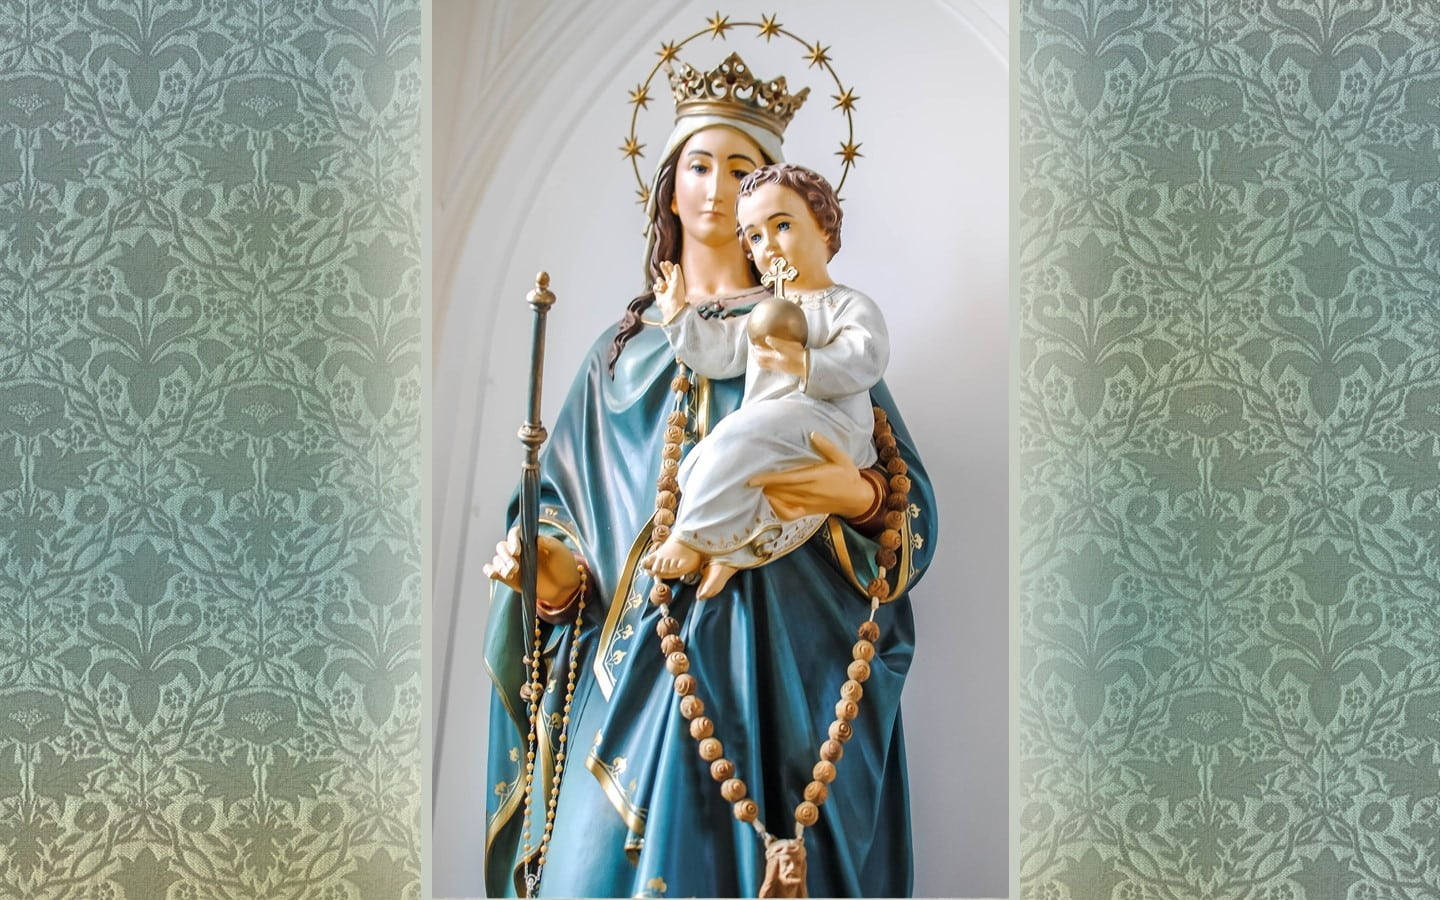 Free Mary And Jesus Wallpaper Downloads, [100+] Mary And Jesus Wallpapers  for FREE 